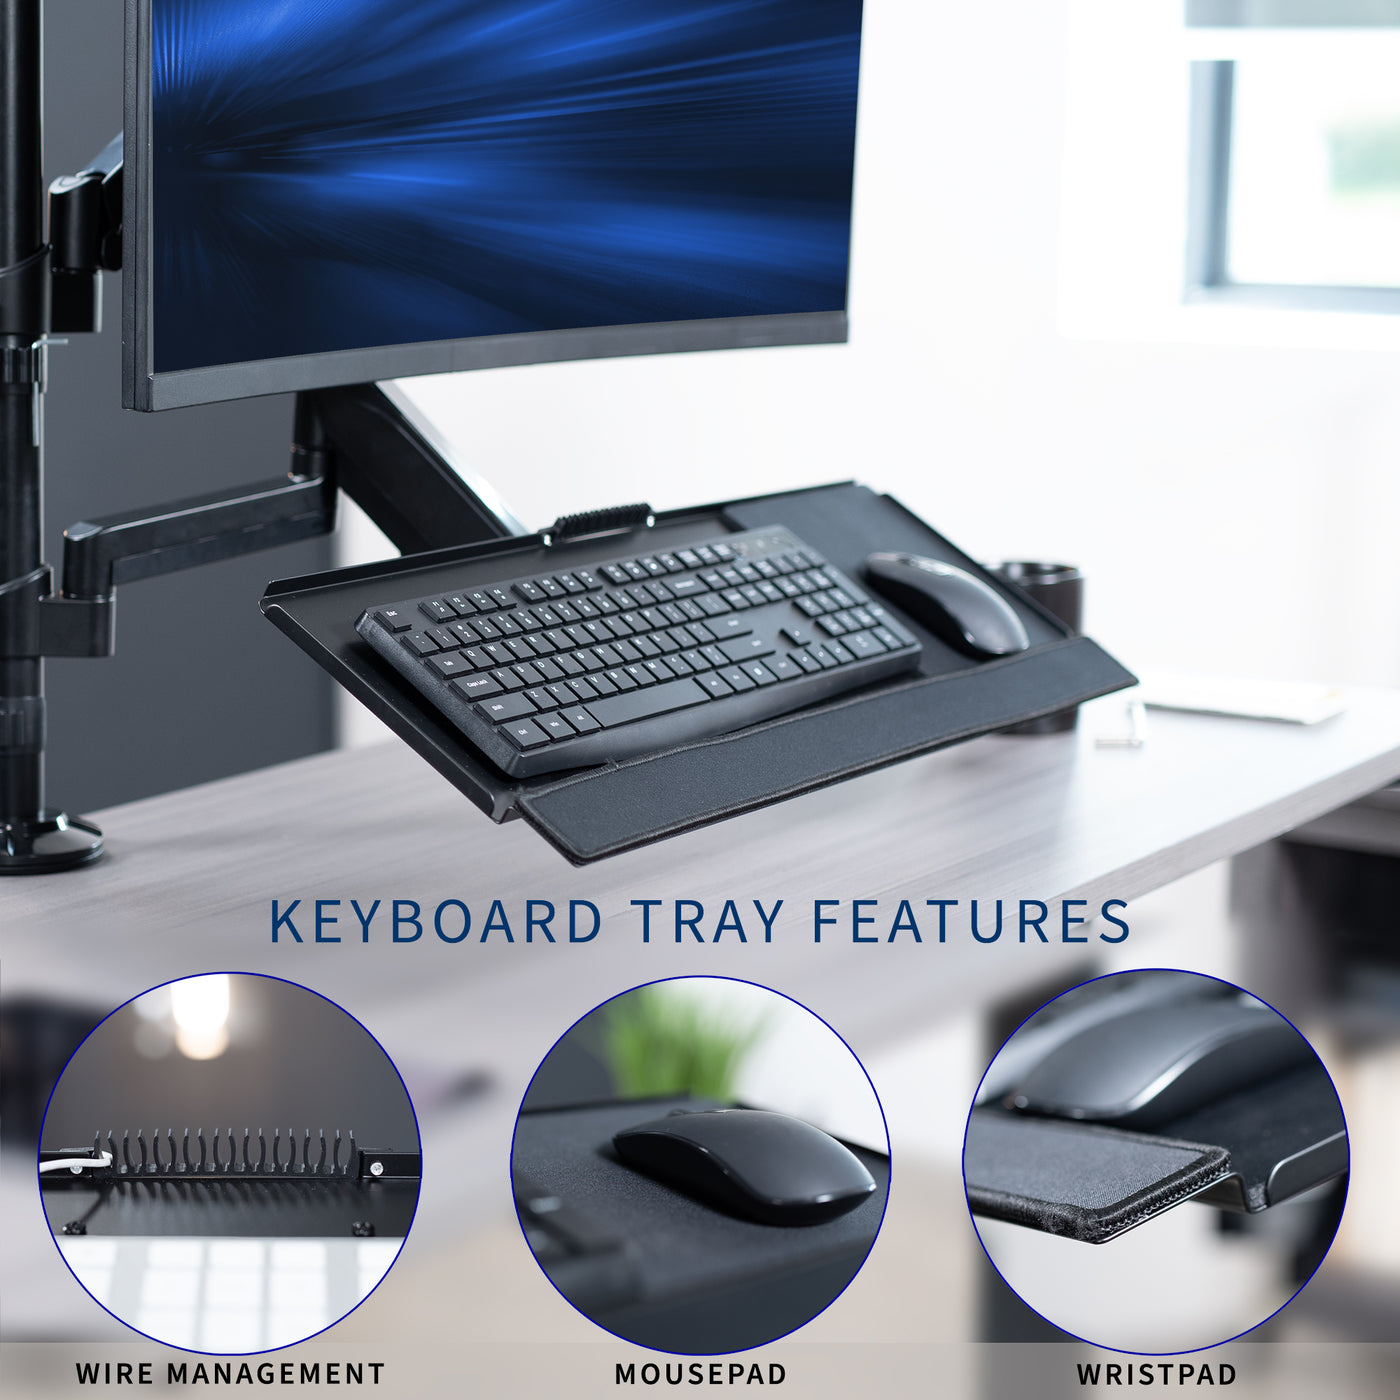 Clamp-on monitor mount and keyboard tray with height adjustment and articulation.